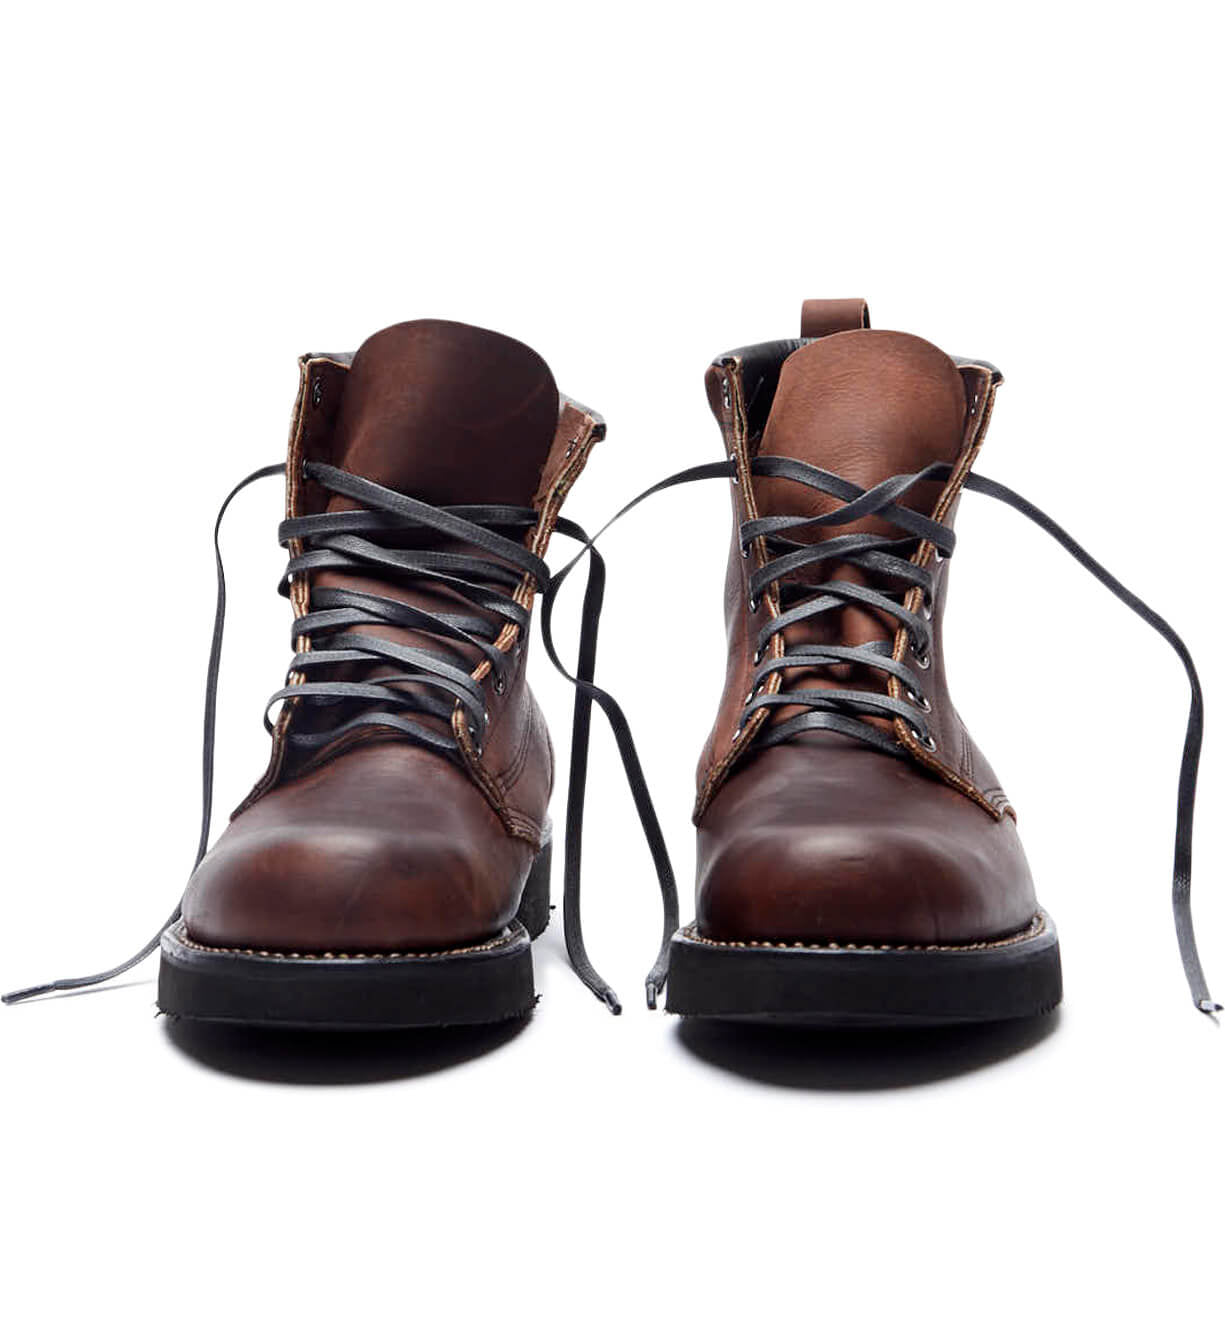 A pair of brown leather James boots from the Broken Homme collection on a white background.